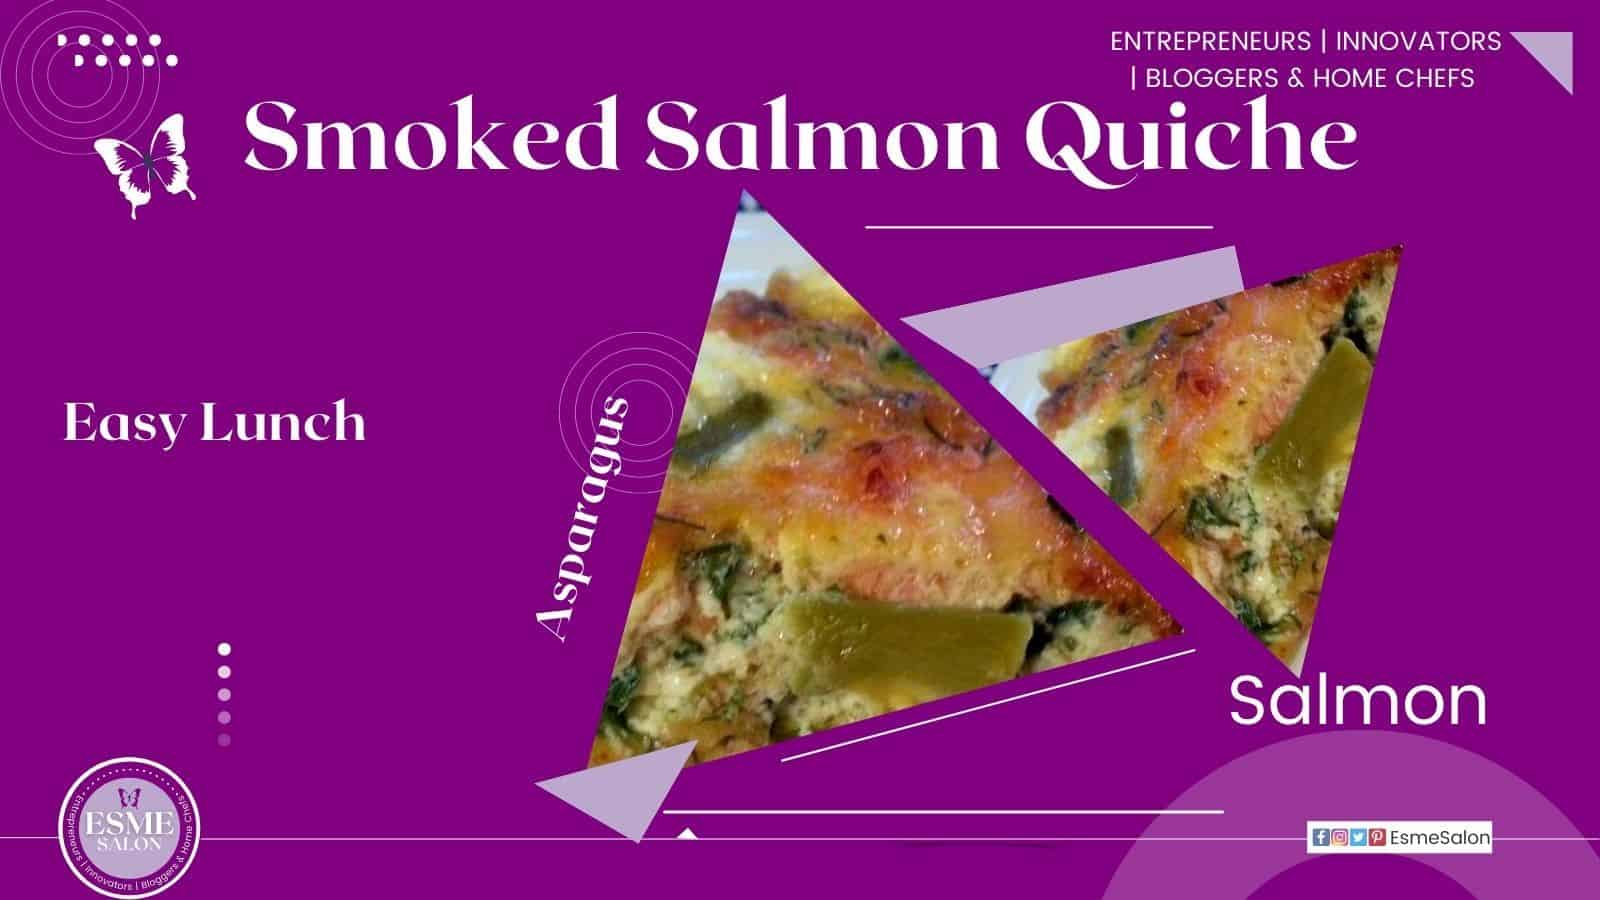 Smoked Salmon Quiche for an easy weekend lunch